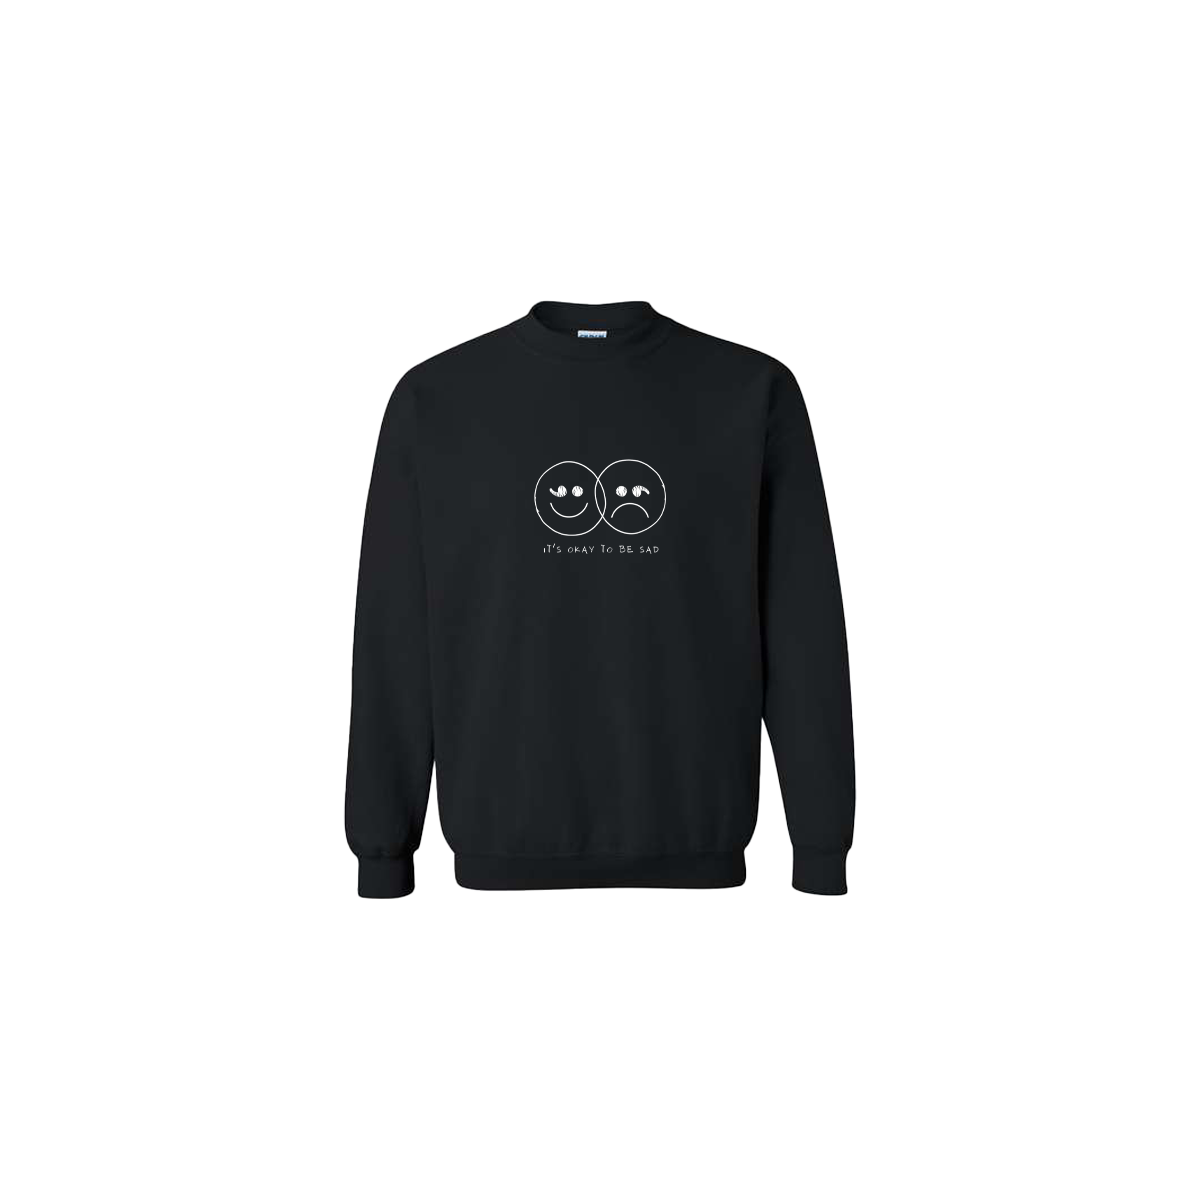 It's Okay to be Sad Double Smiley Face Embroidered Black Crewneck - Mental Health Awareness Clothing